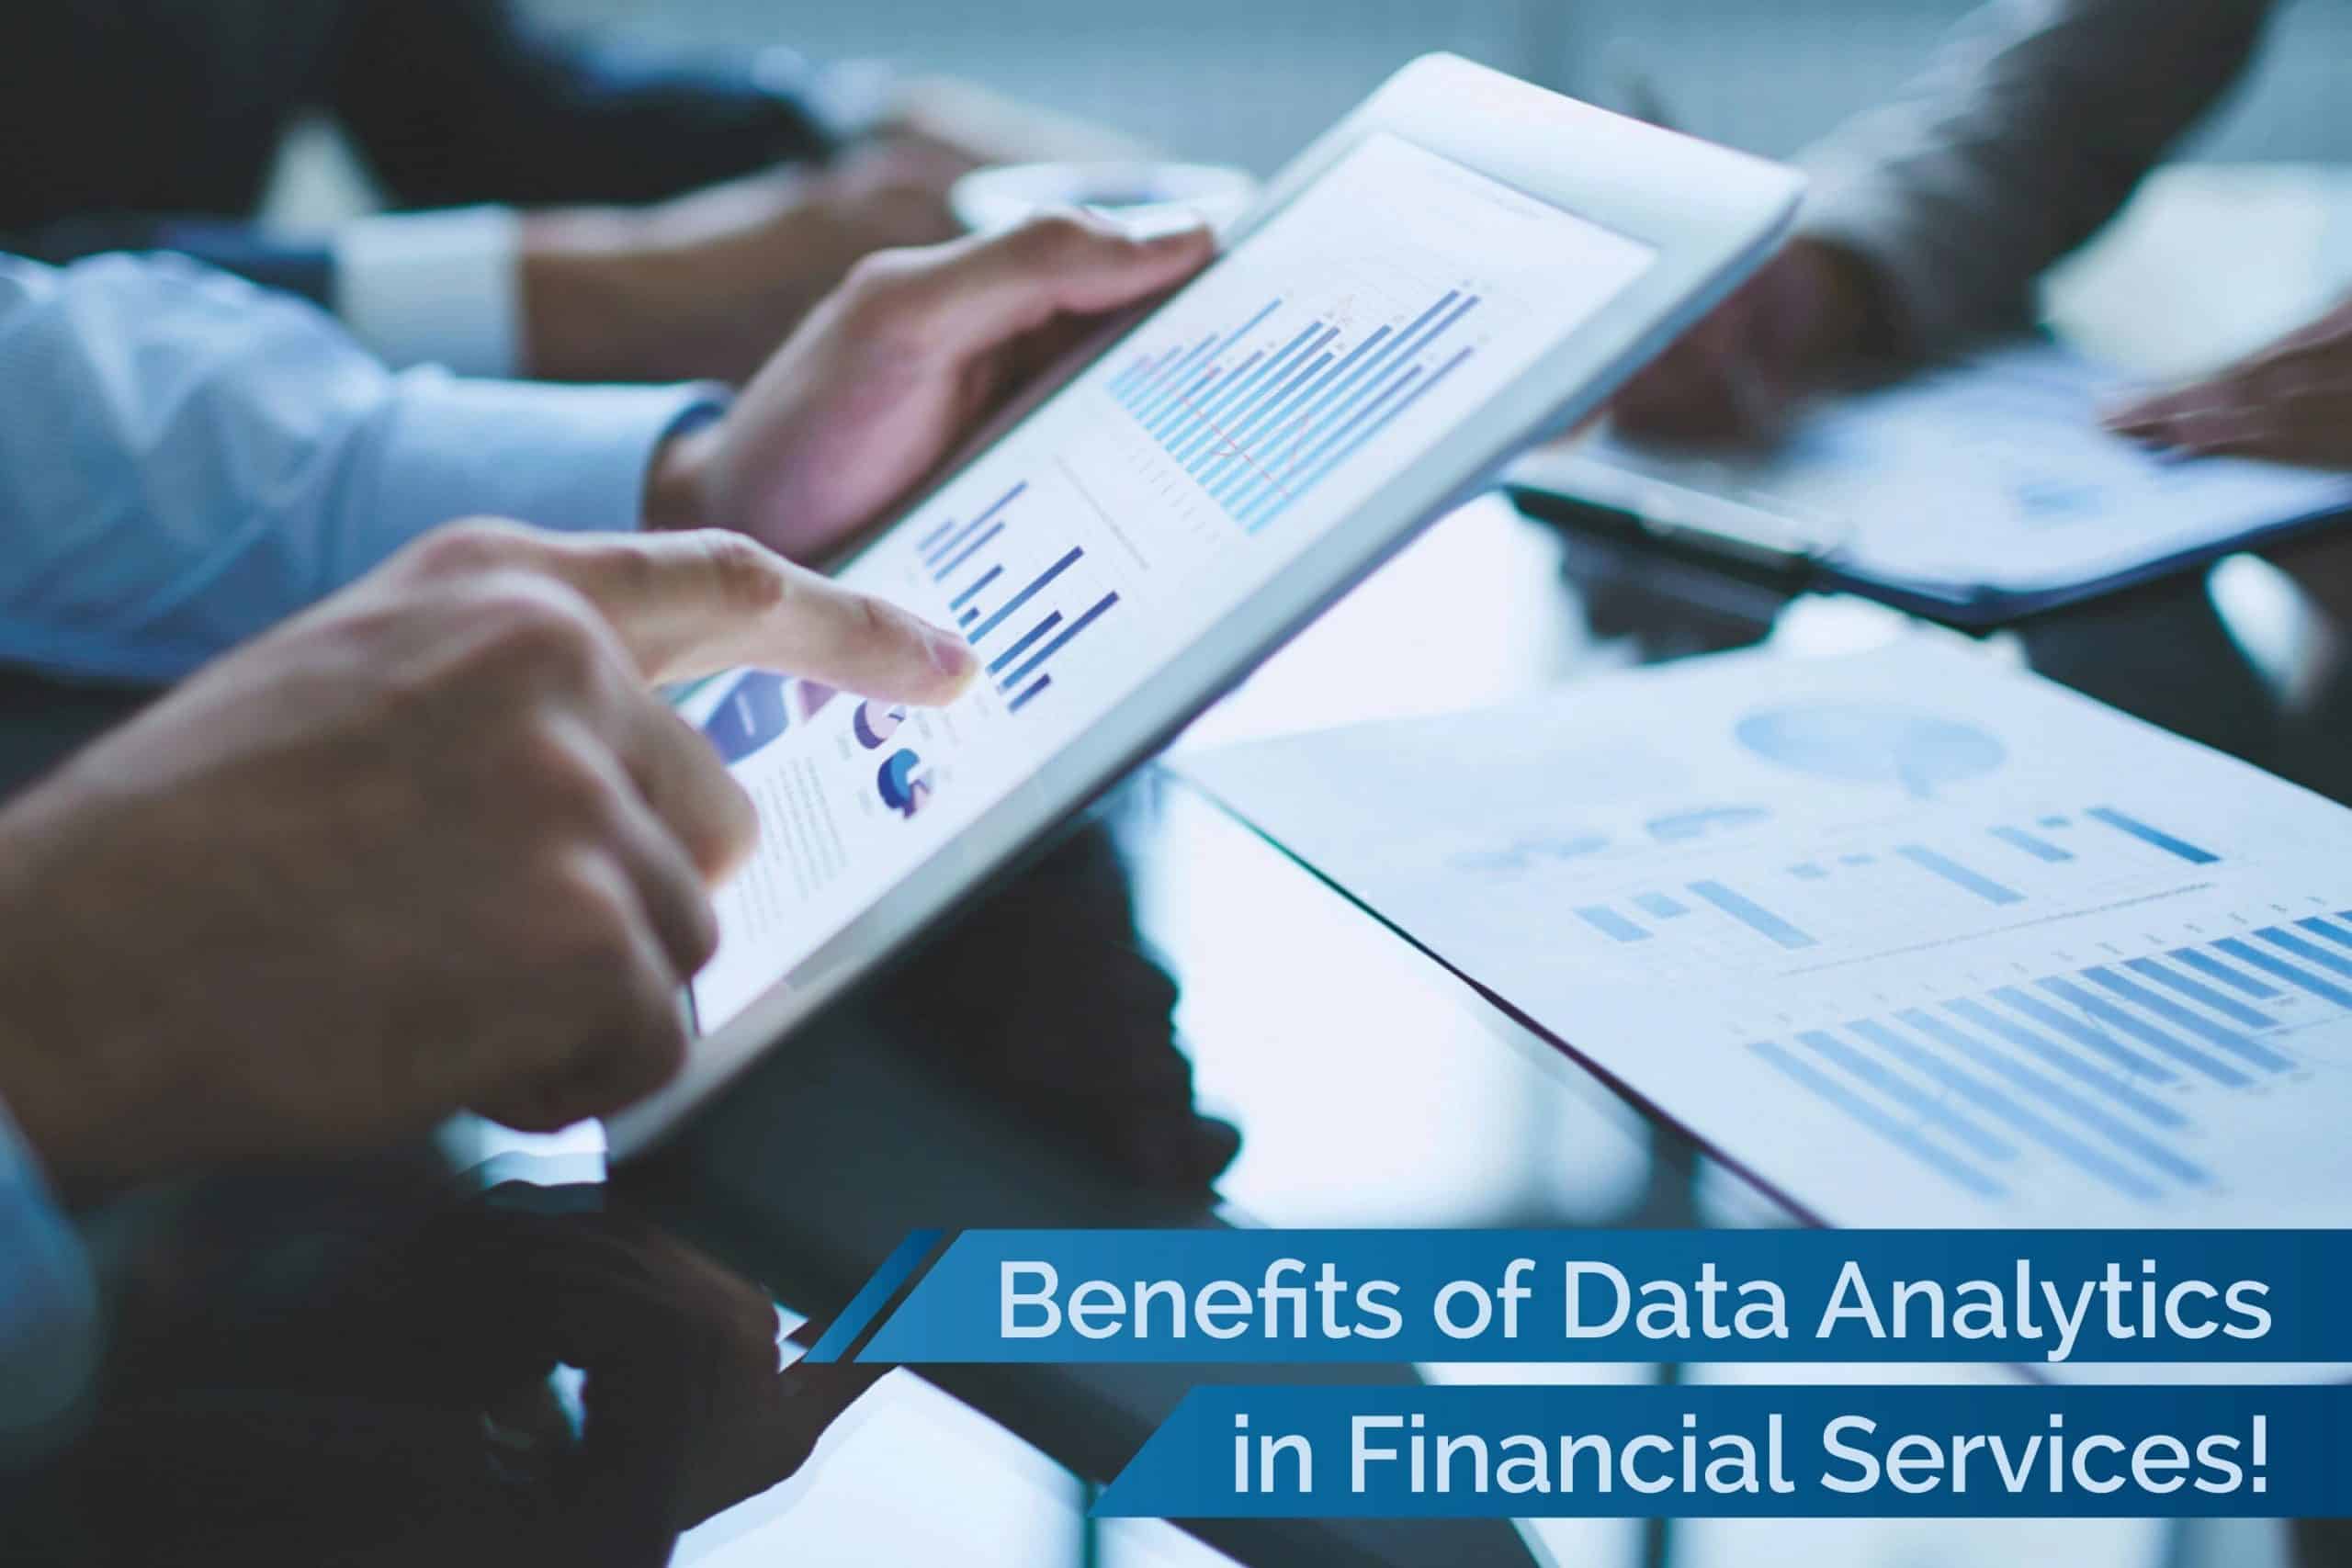 Benefits of Data Analytics in Financial Services!